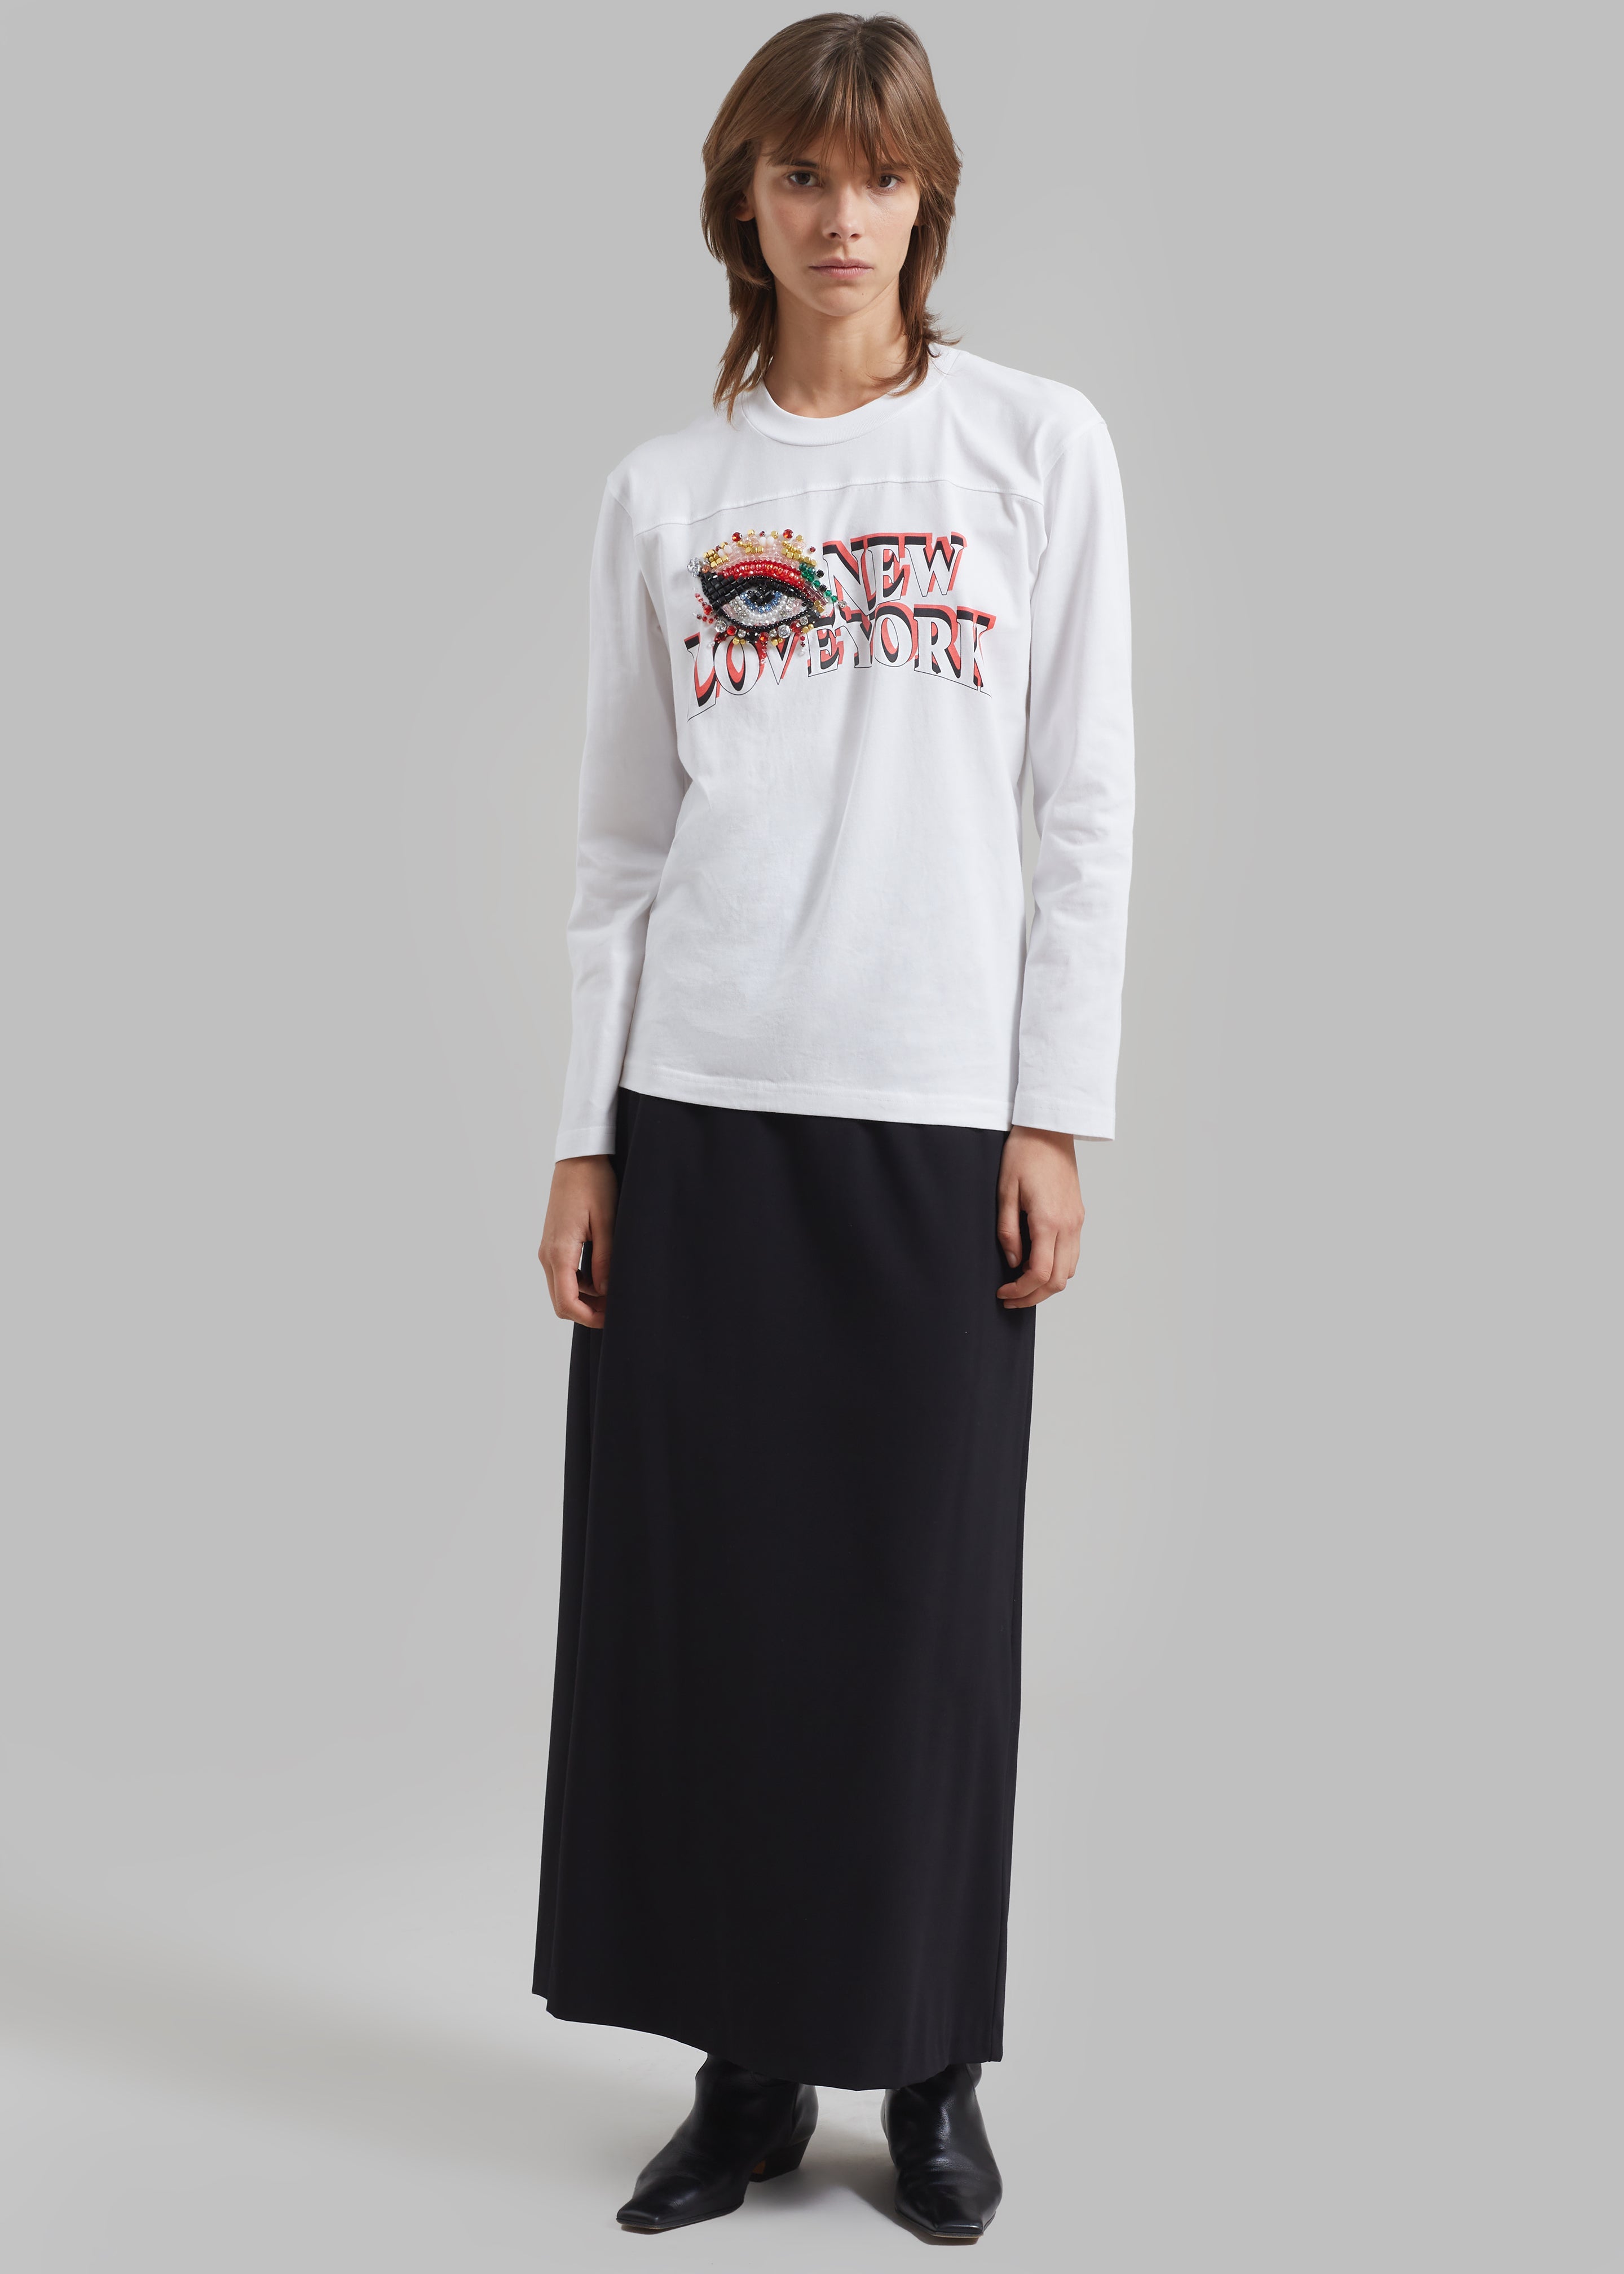 3.1 Phillip Lim Eye Love NY Embroidered Long Sleeve Relaxed Tee - White - 3